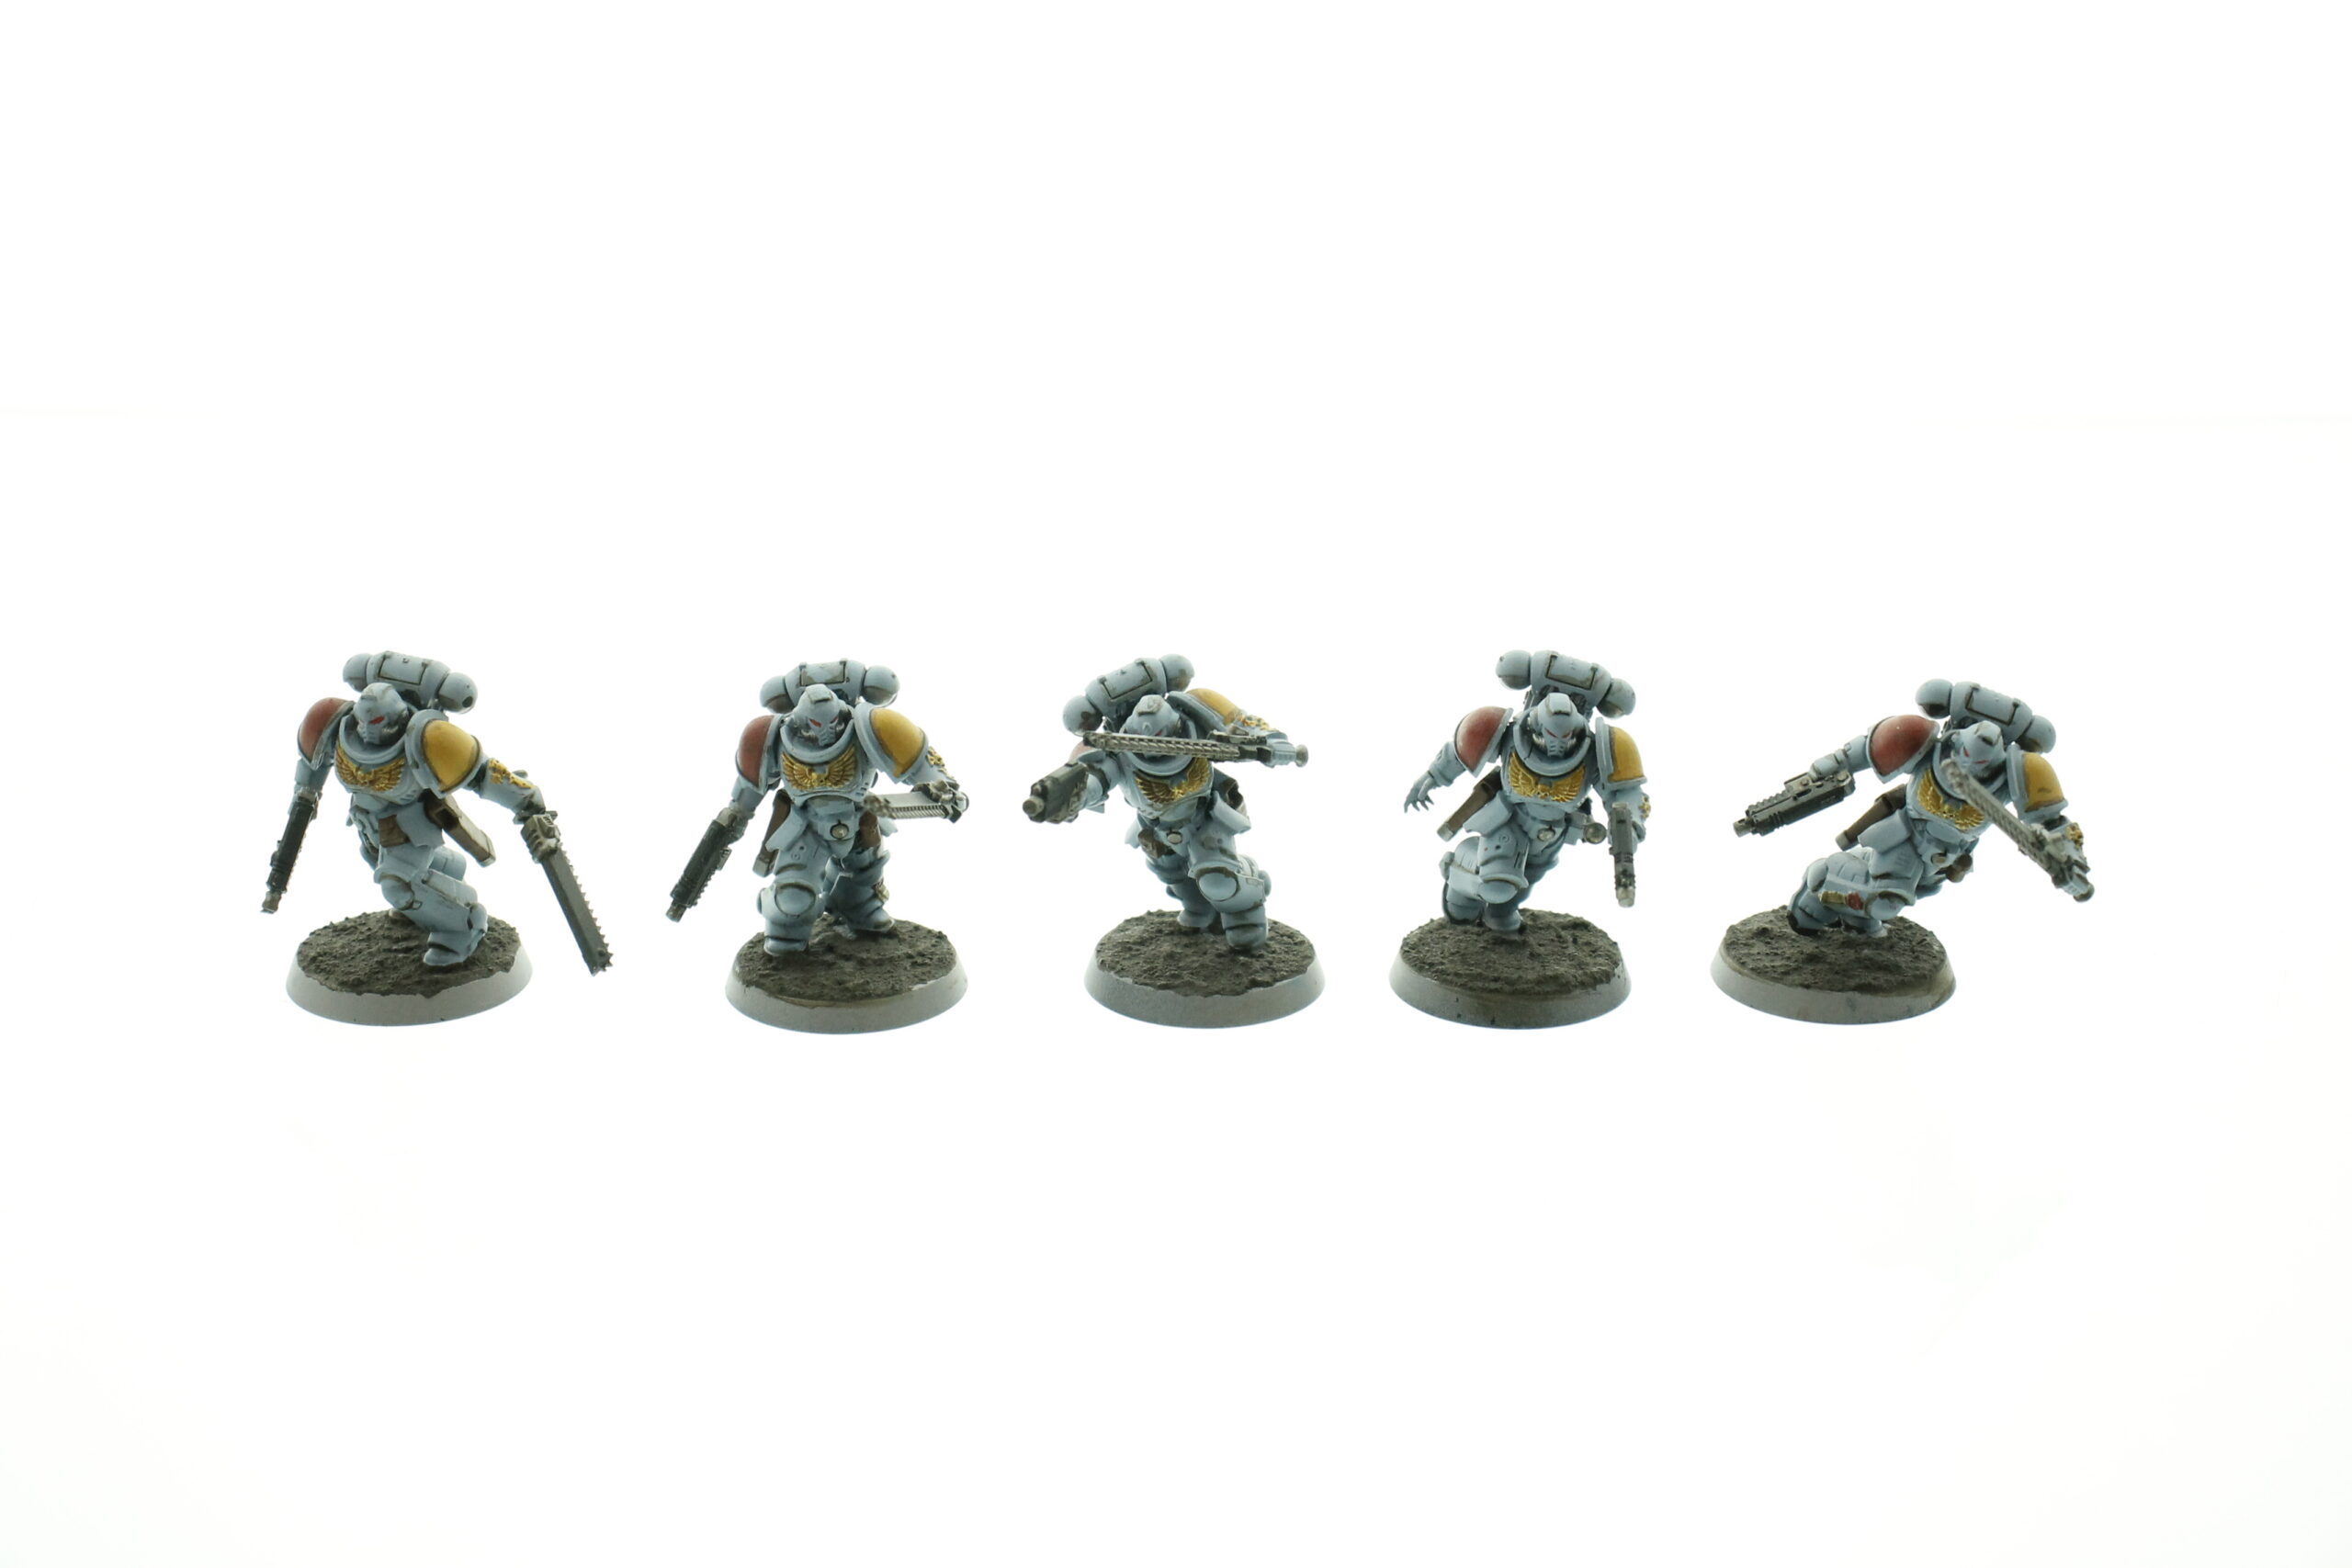 Warhammer 40.000 Space Wolves Reivers | WHTREASURY